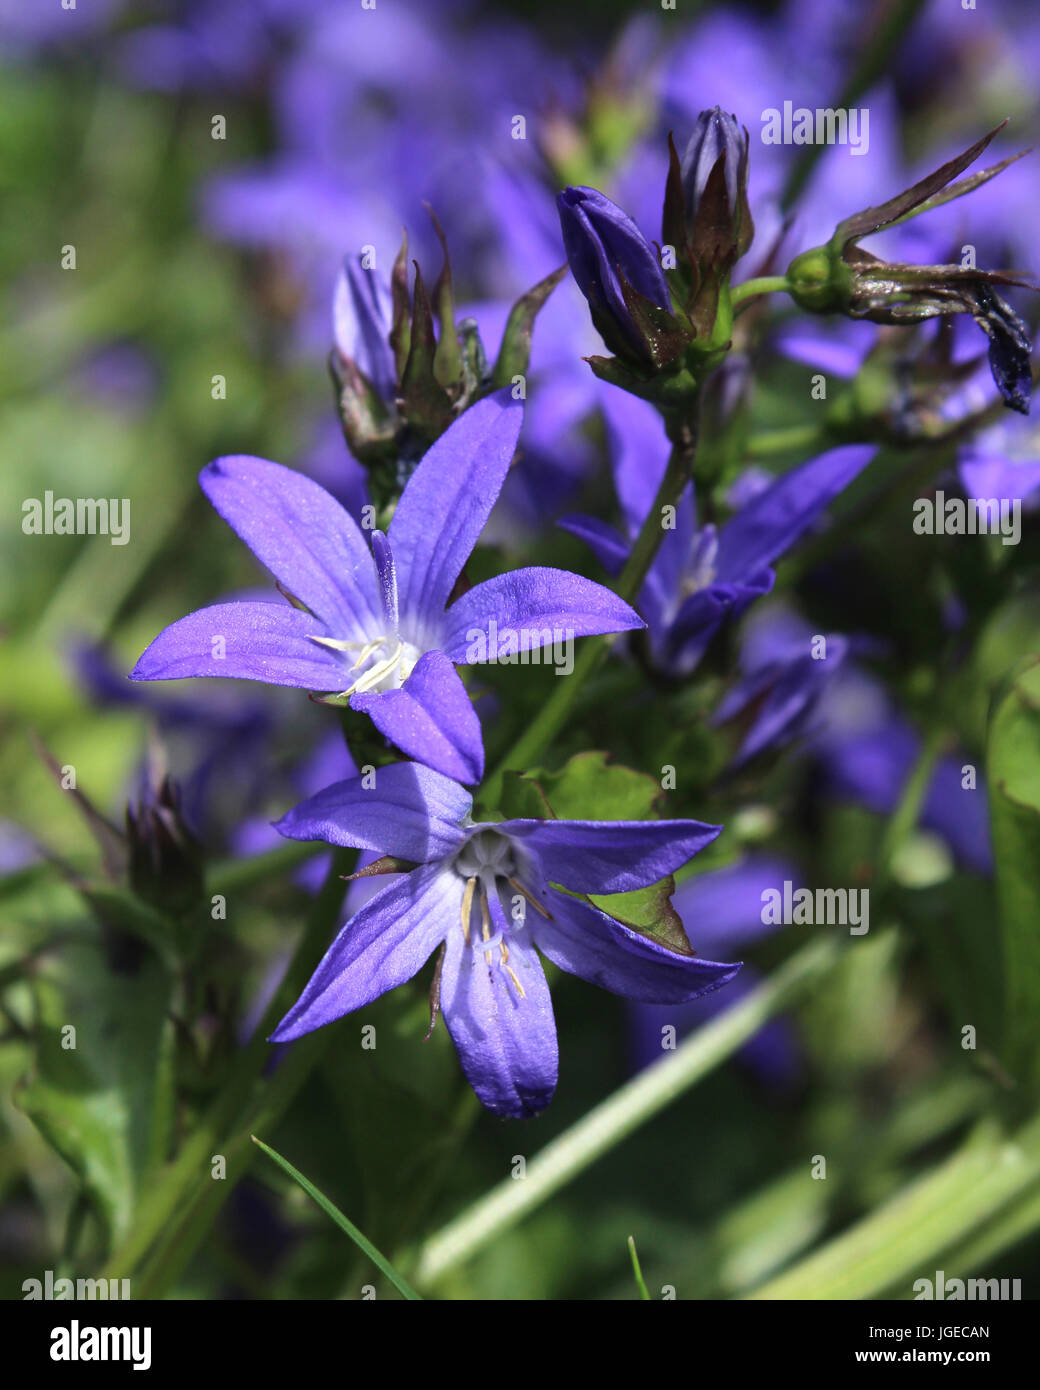 The bright purple star shaped flowers of the low growing plant Campanula poscharskyana. Stock Photo